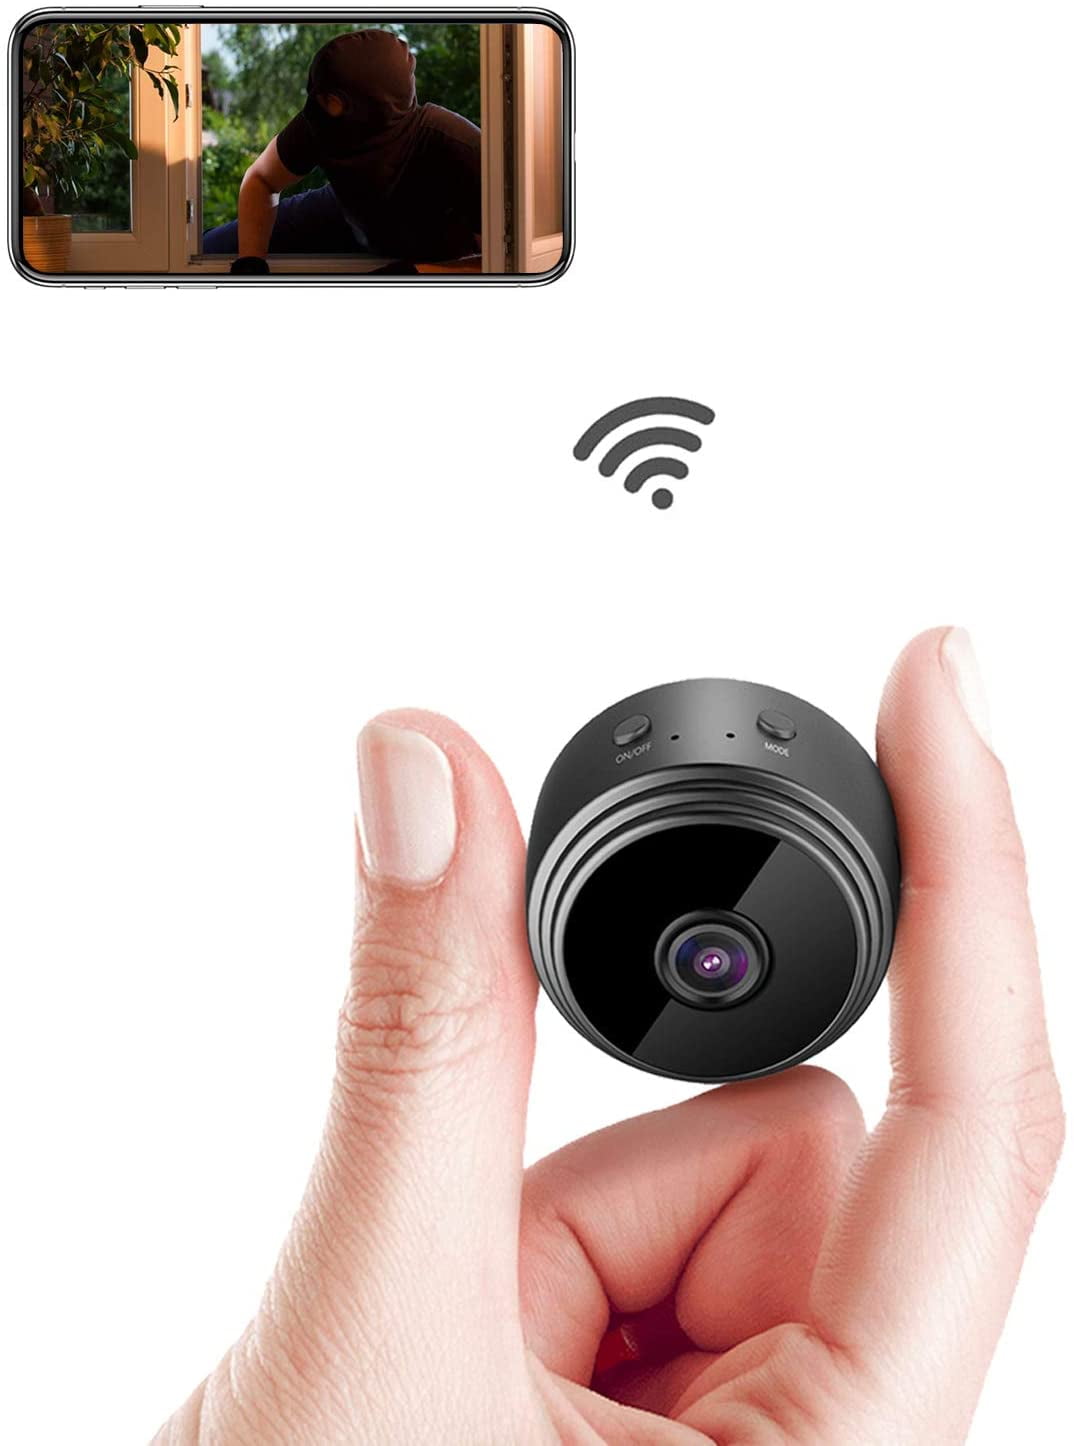 Atlantic Pedicab Develop WiFi Mini Camera Ultra Compact Network Camera Wireless IP Camera 1080P with  Motion Detection Night Vision Cameras, Nanny Baby Pet Cam for iPhone /  Android Phone / iPad - Walmart.com